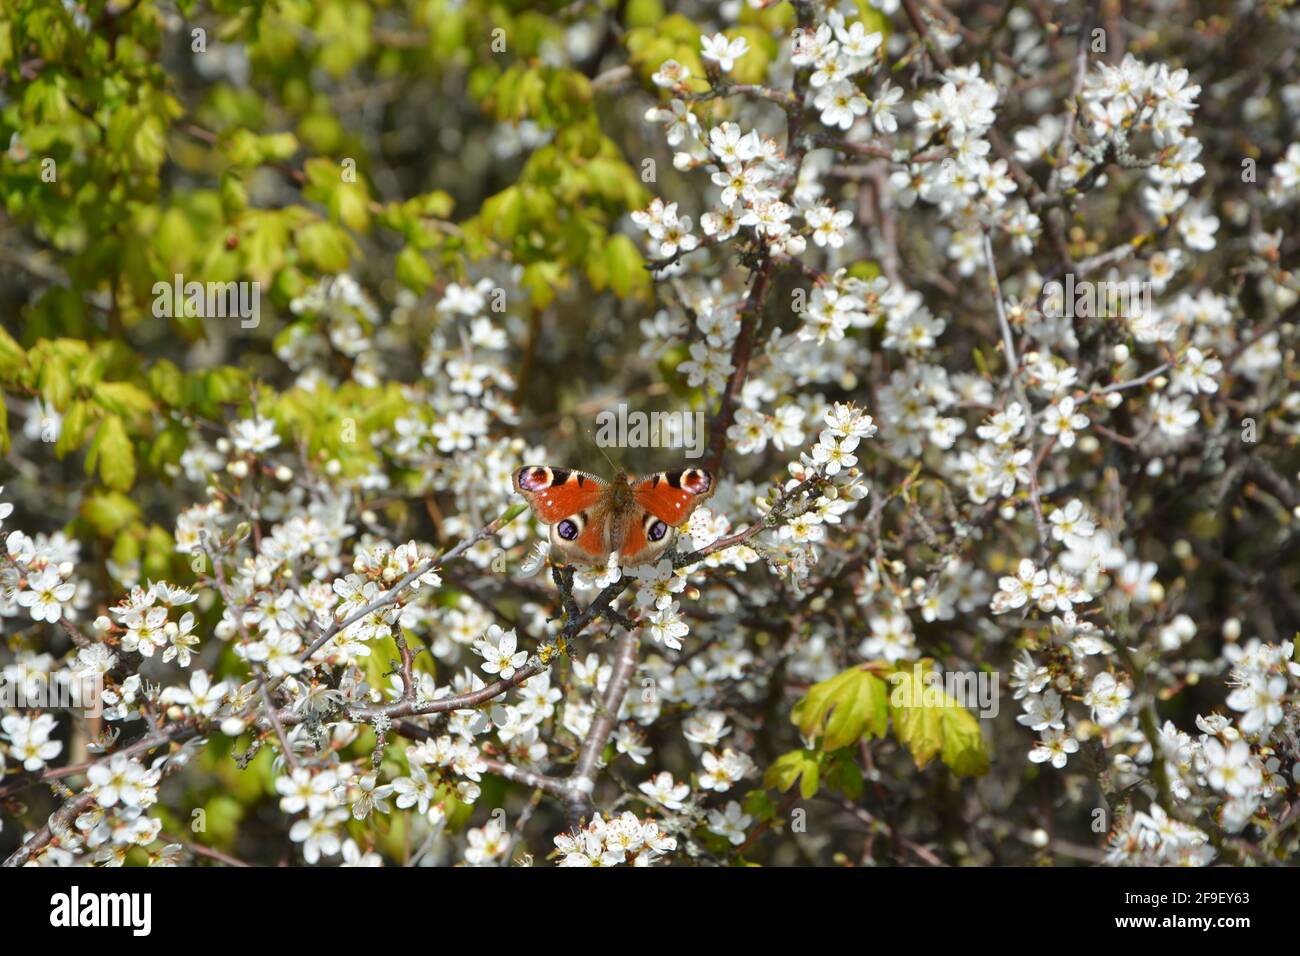 Peacock Butterfly on blossom, Butterfly on flower, Butterfly on Flowers, DSLR Stock Photo